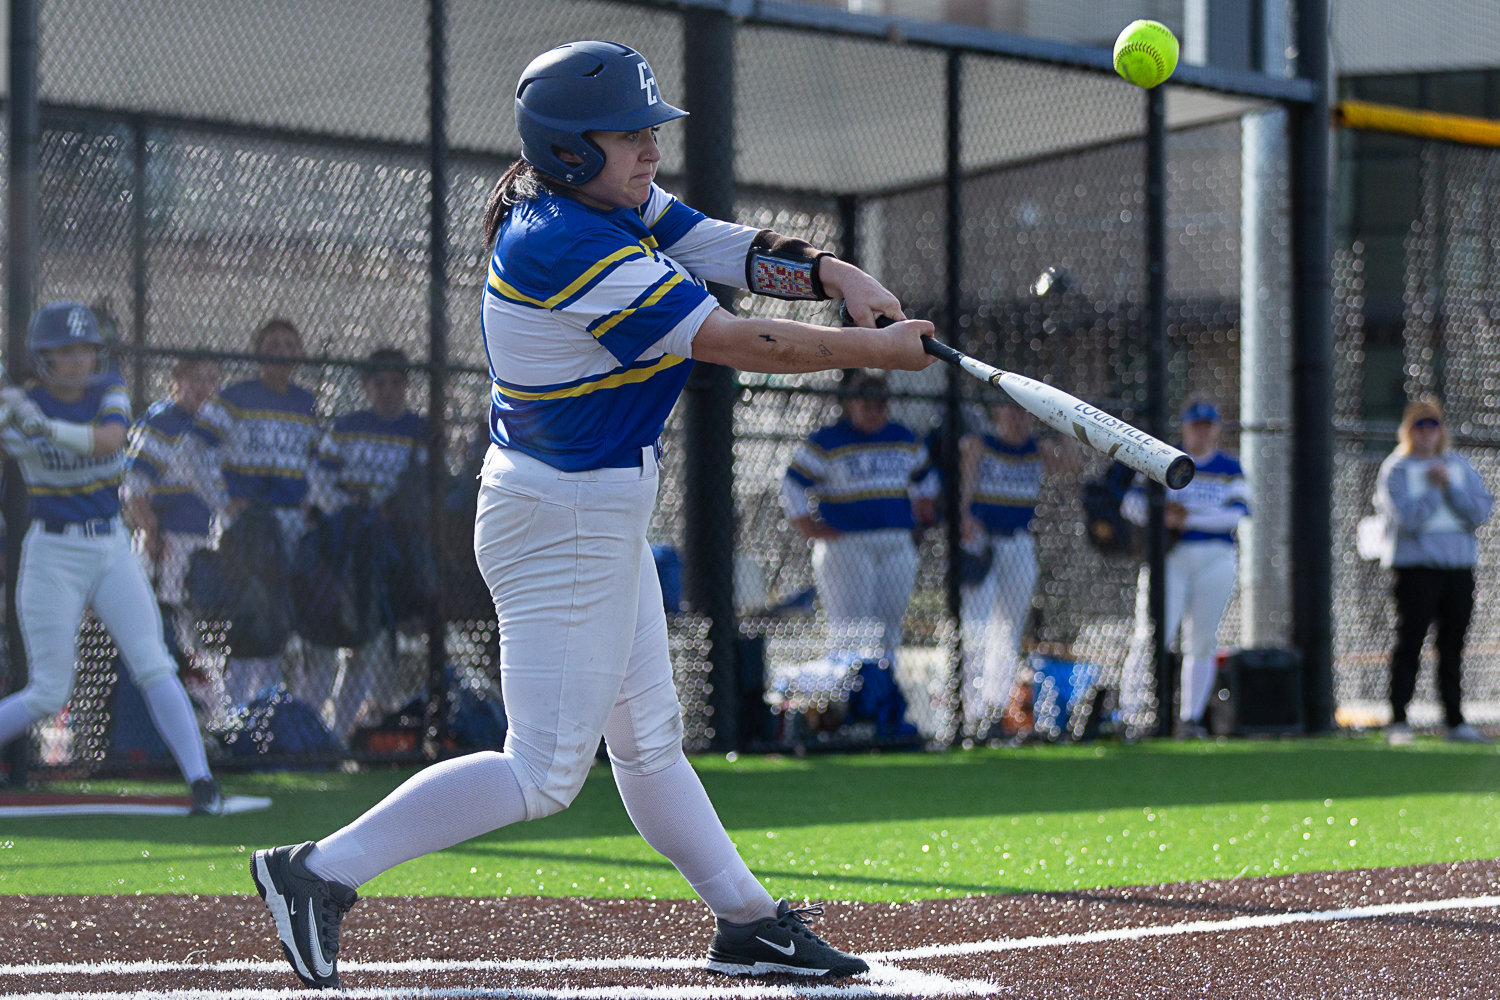 Centralia College first baseman Kaylee Ashley makes contact with a pitch against Clark in Centralia March 17.